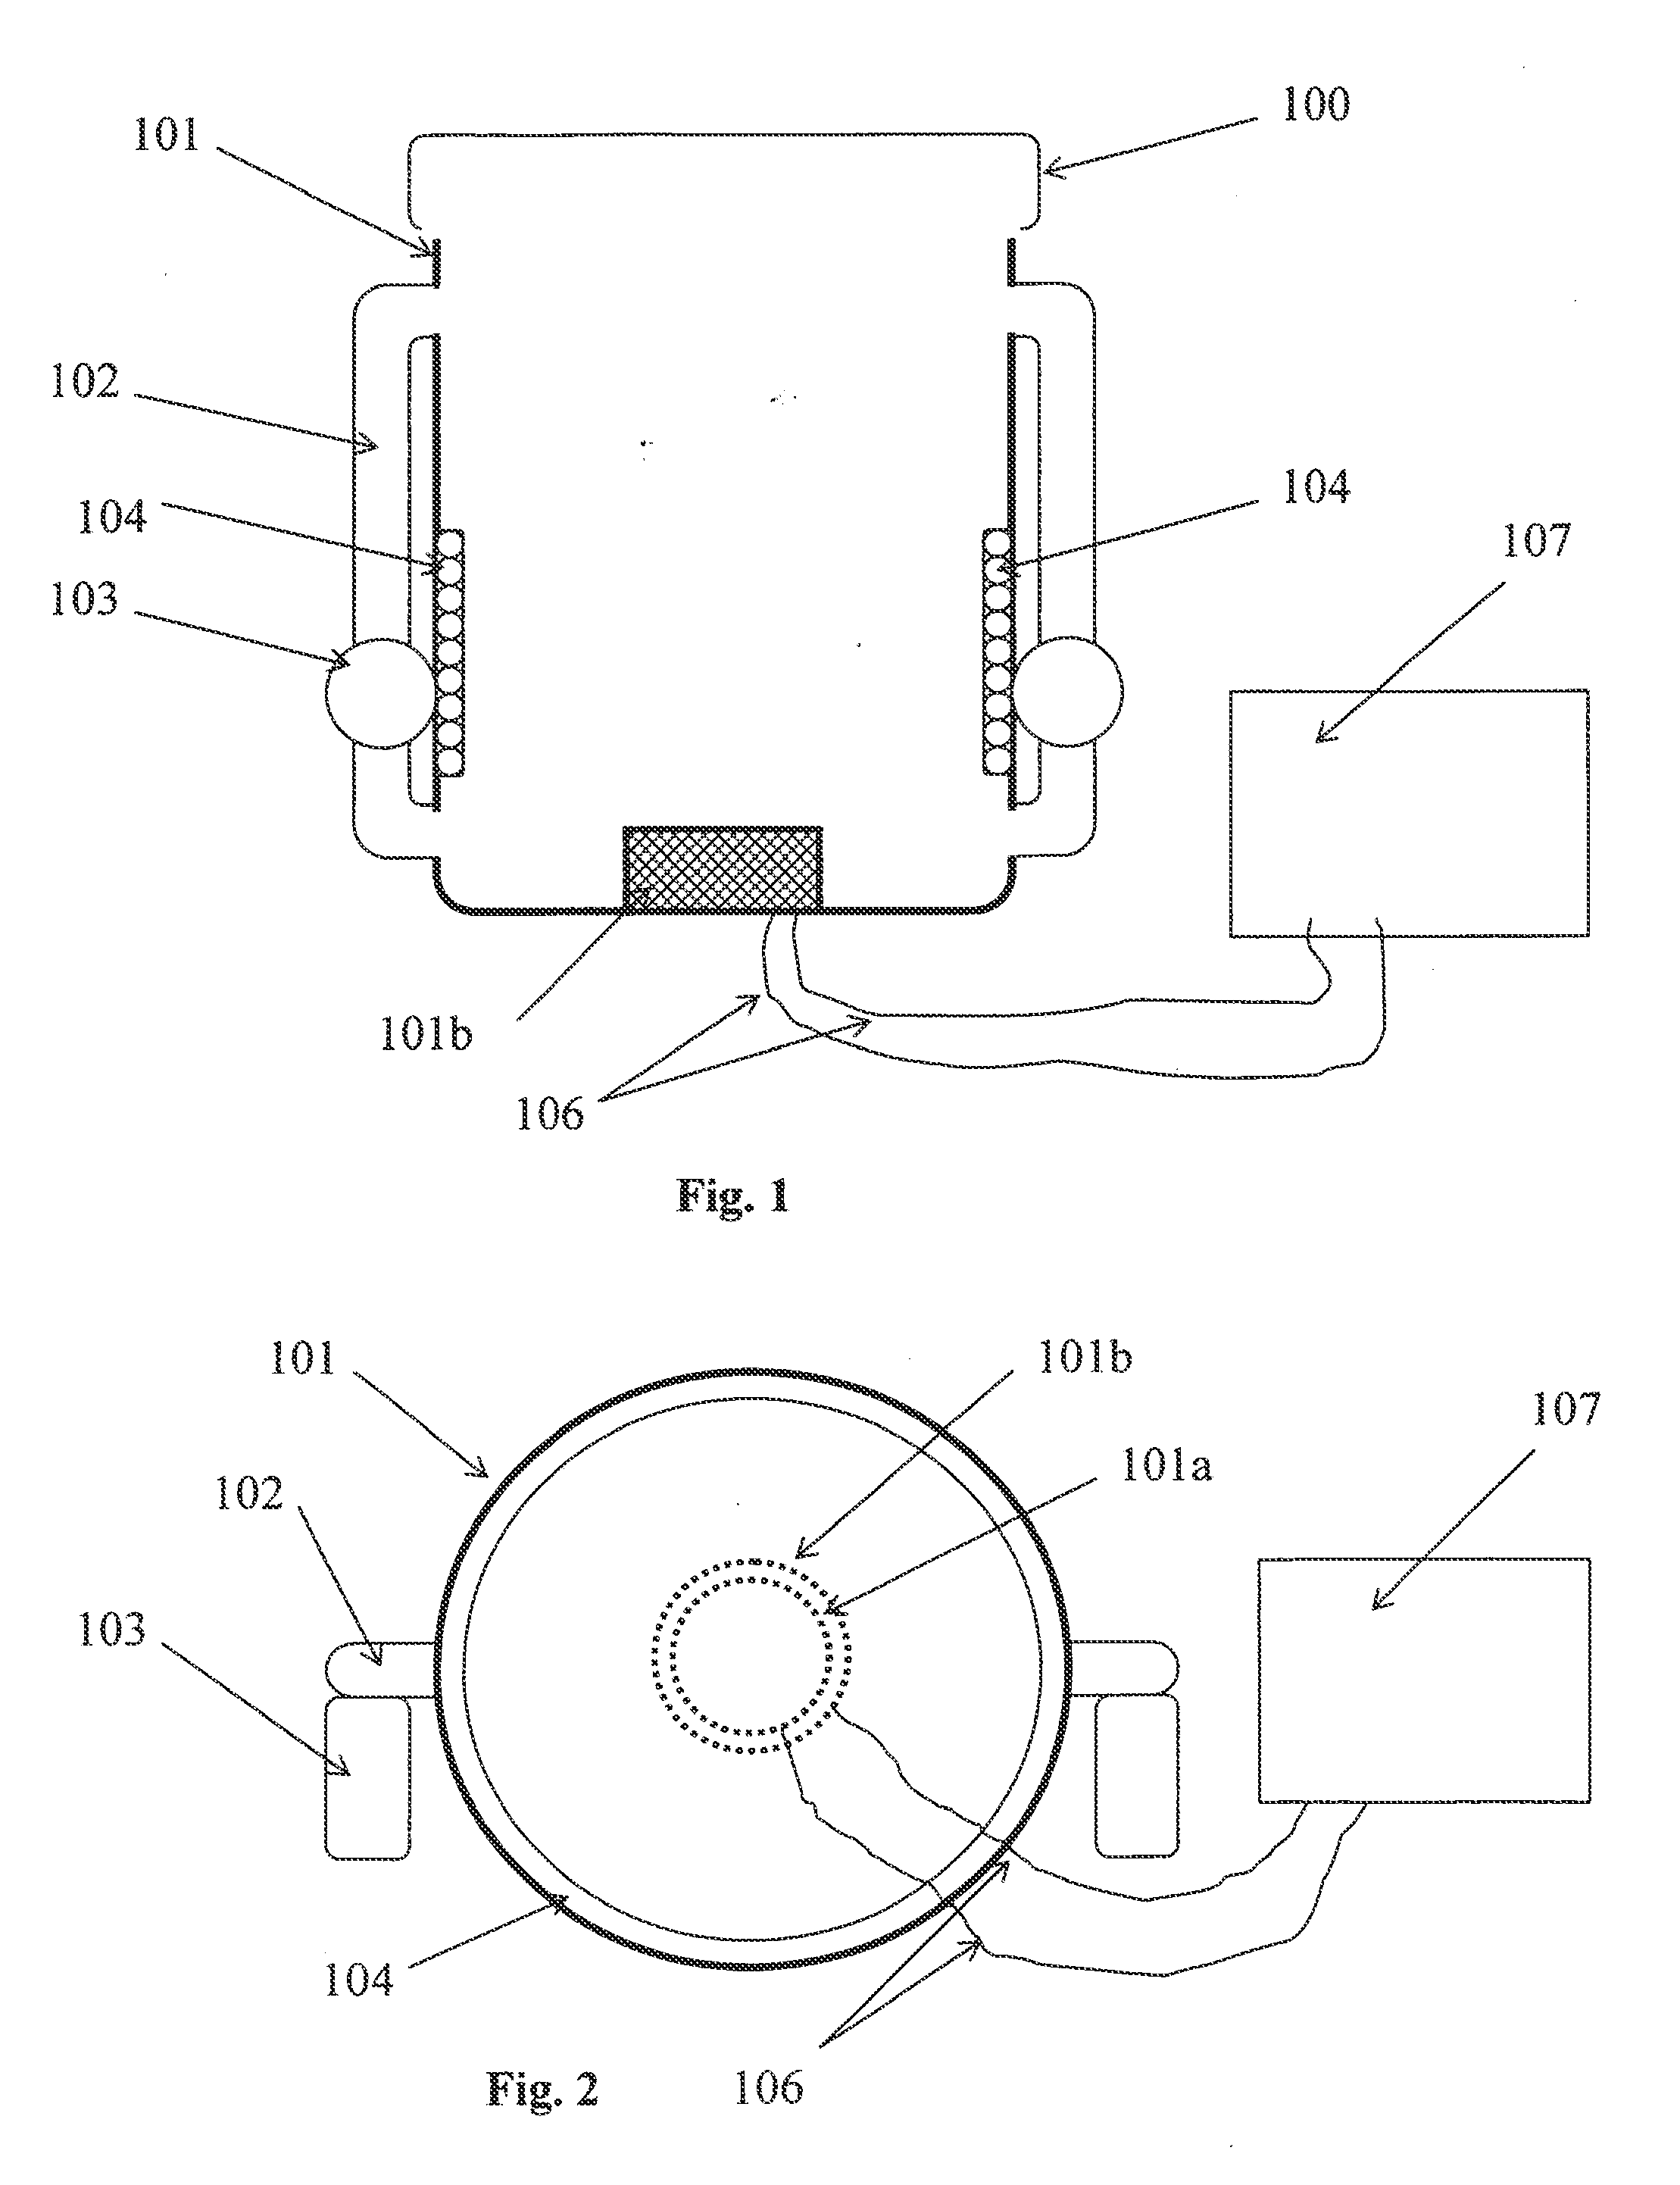 Method and Apparatus for Producing a Stabilized Antimicrobial Non-toxic Electrolyzed Saline Solution Exhibiting Potential as a Therapeutic